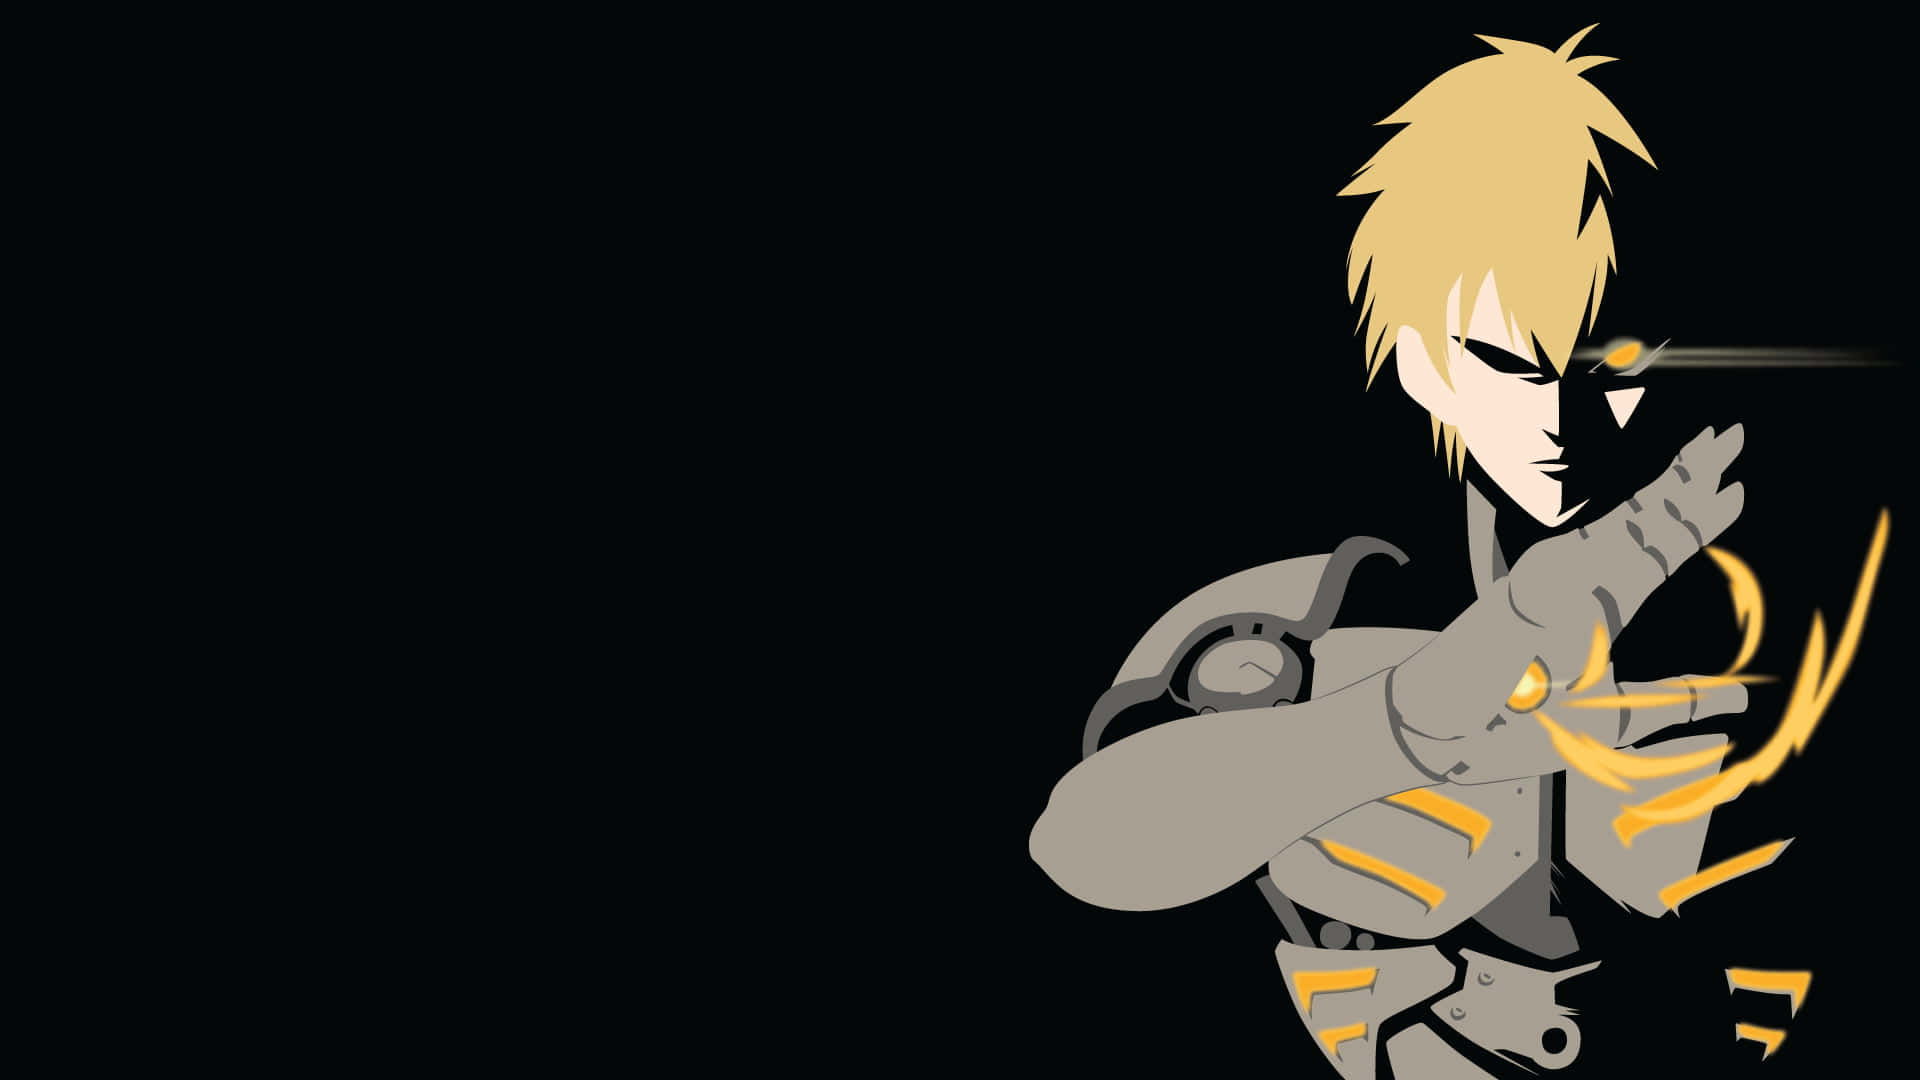 Genos - The powerful cyborg warrior in action Wallpaper